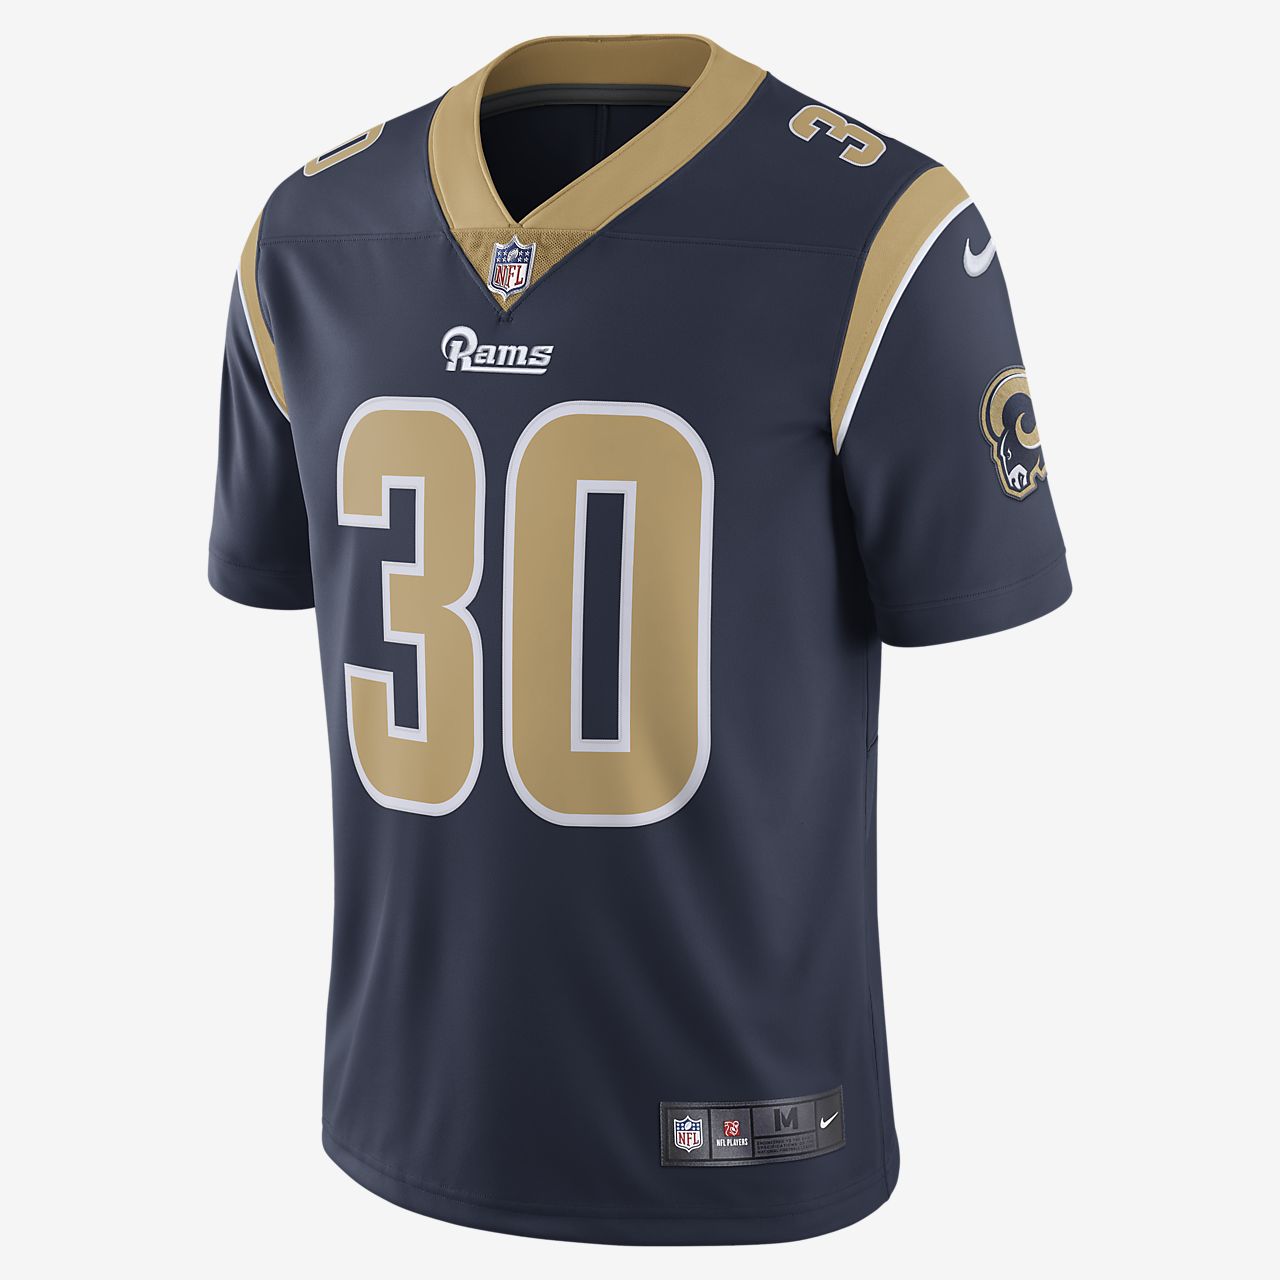 where can i buy a rams jersey